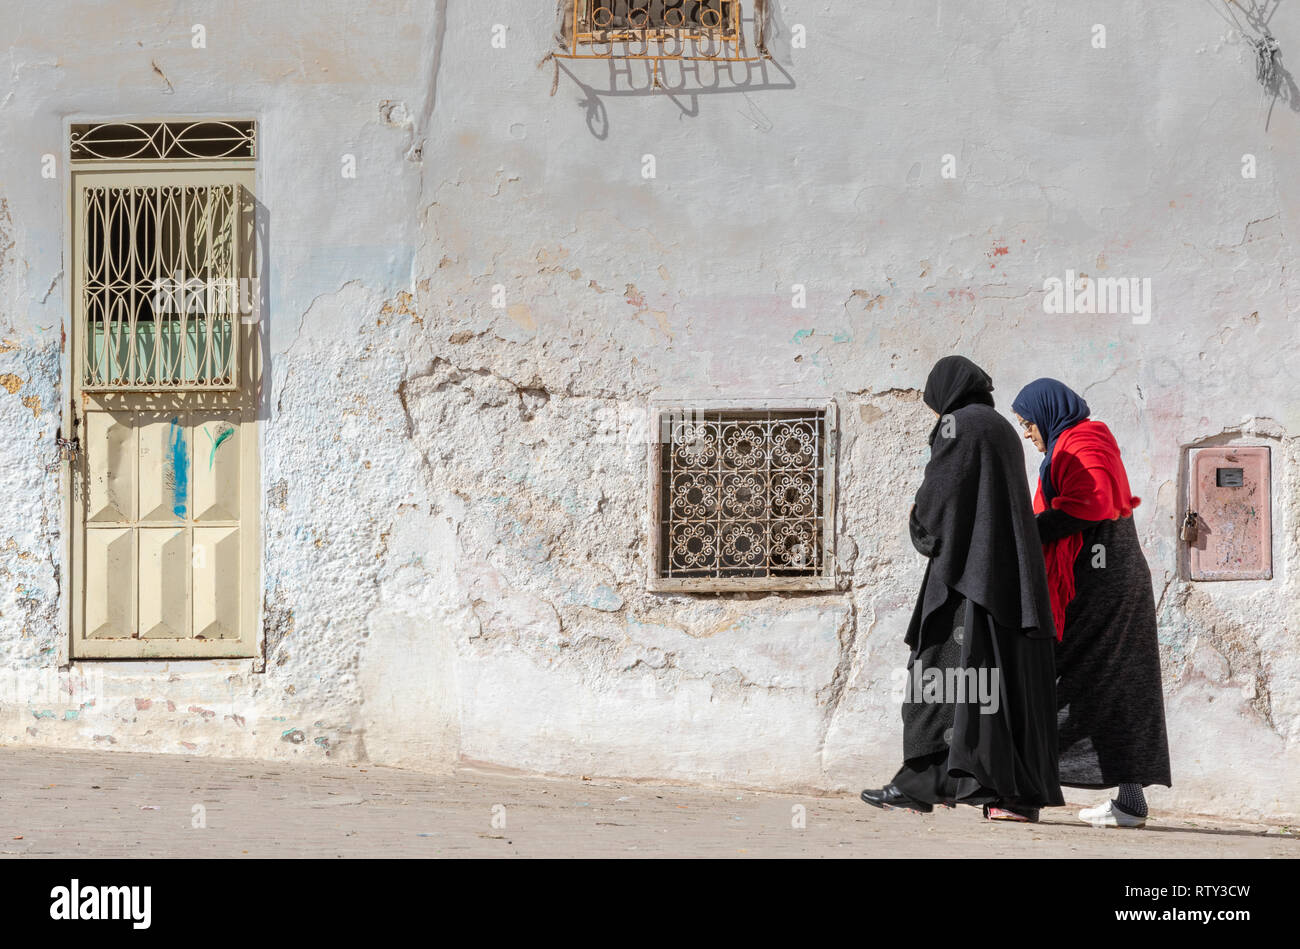 Two muslim woment walking in the ruins of the ancient Jewish Quarter (mellah) in Sefrou, Morocco Stock Photo